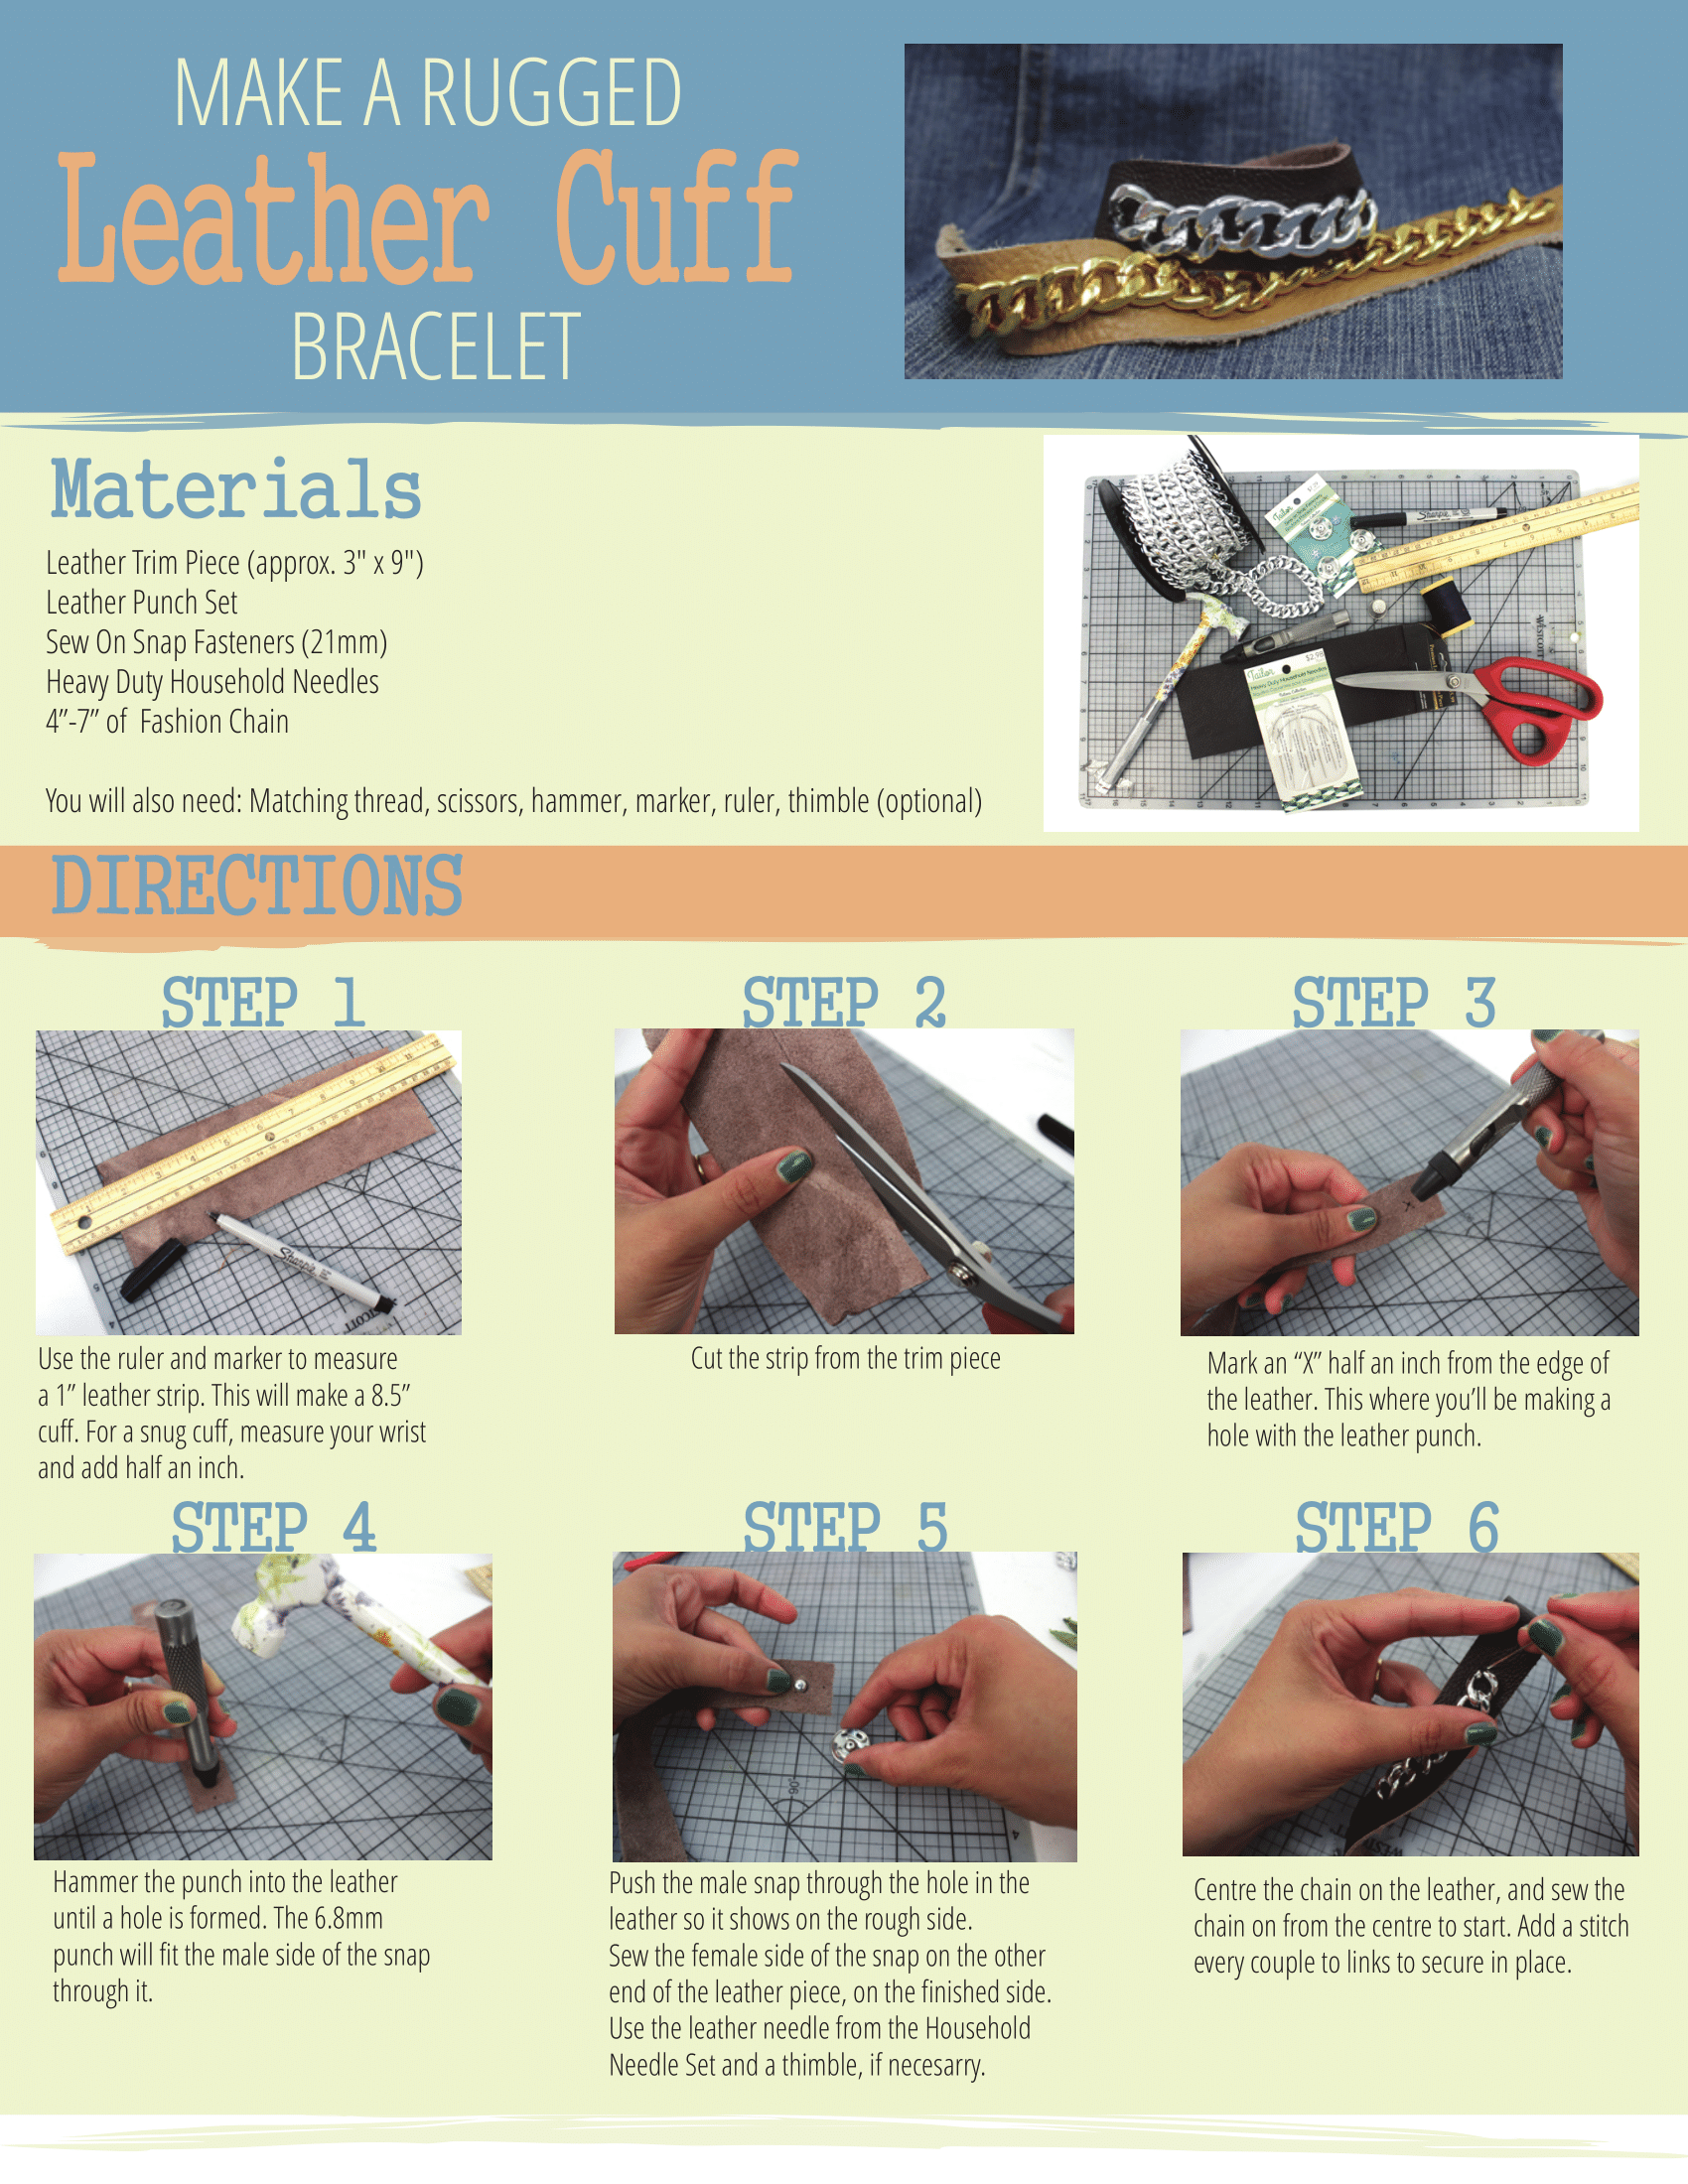 Materials & instructions to create a rugged leather cuff bracelet